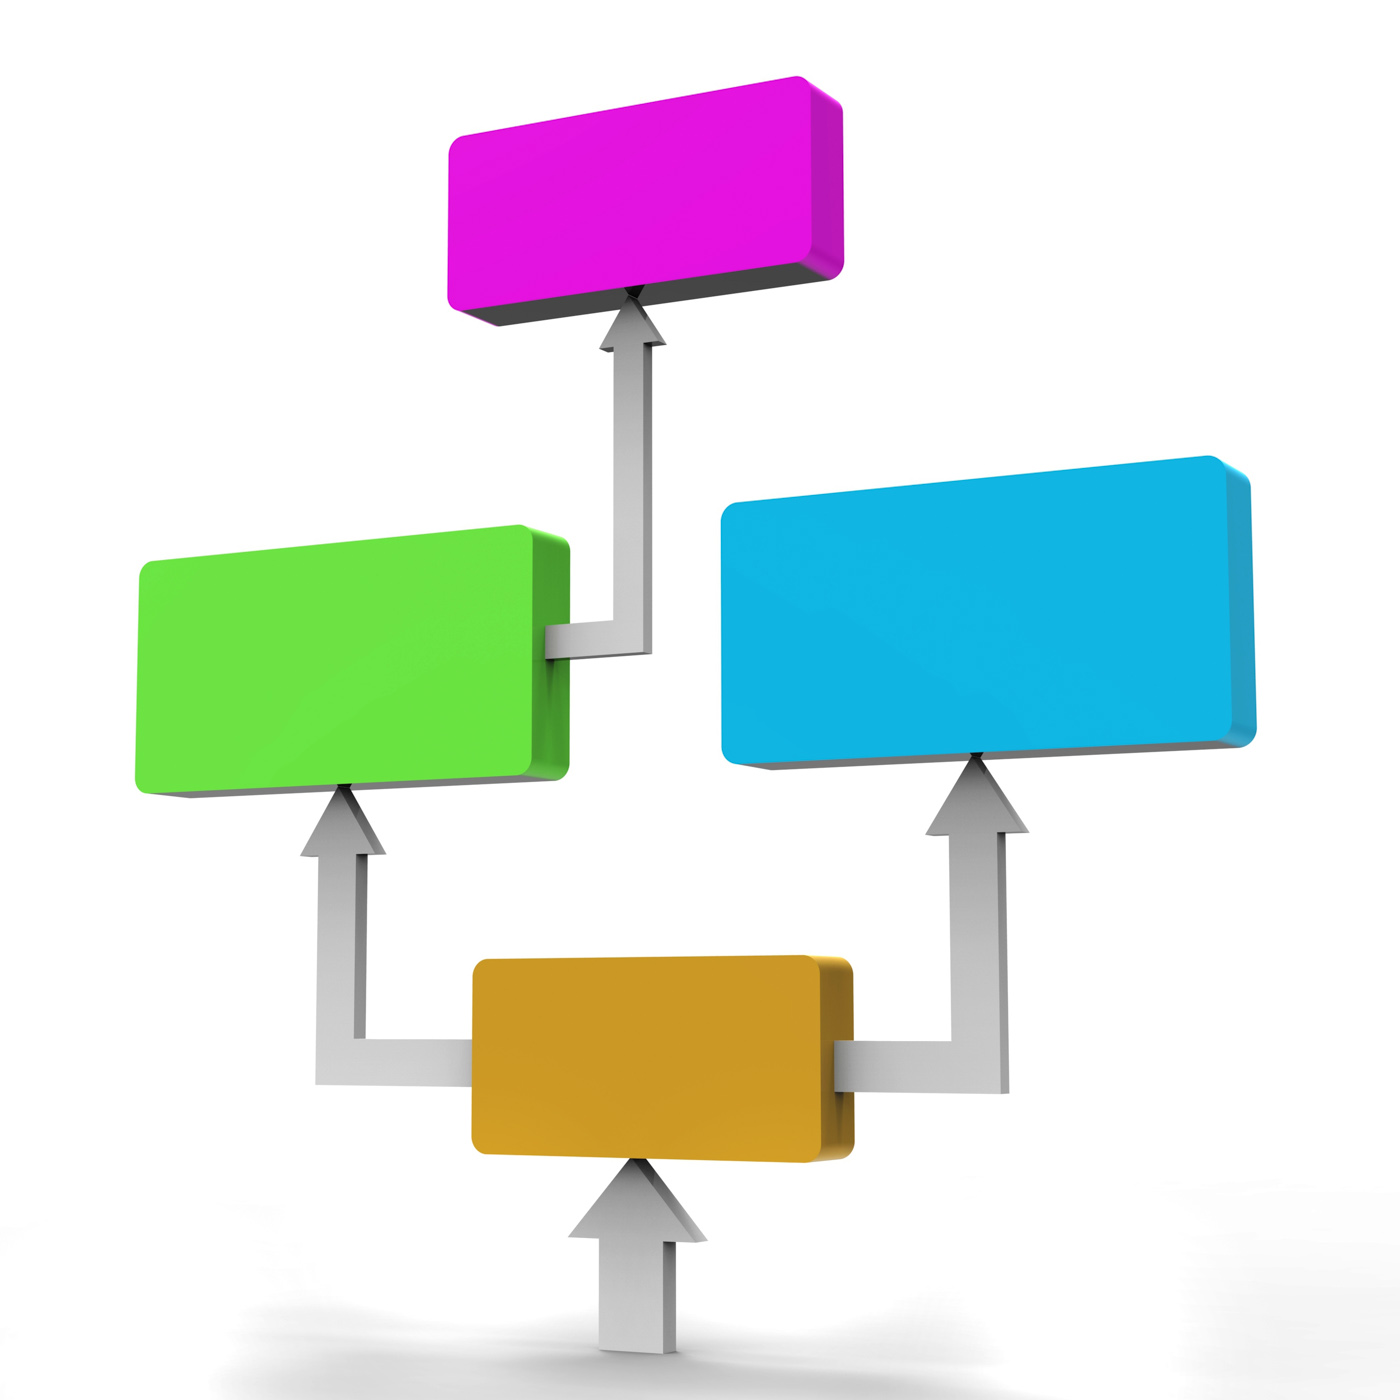 Flow diagram represents charting organizations and graph photo